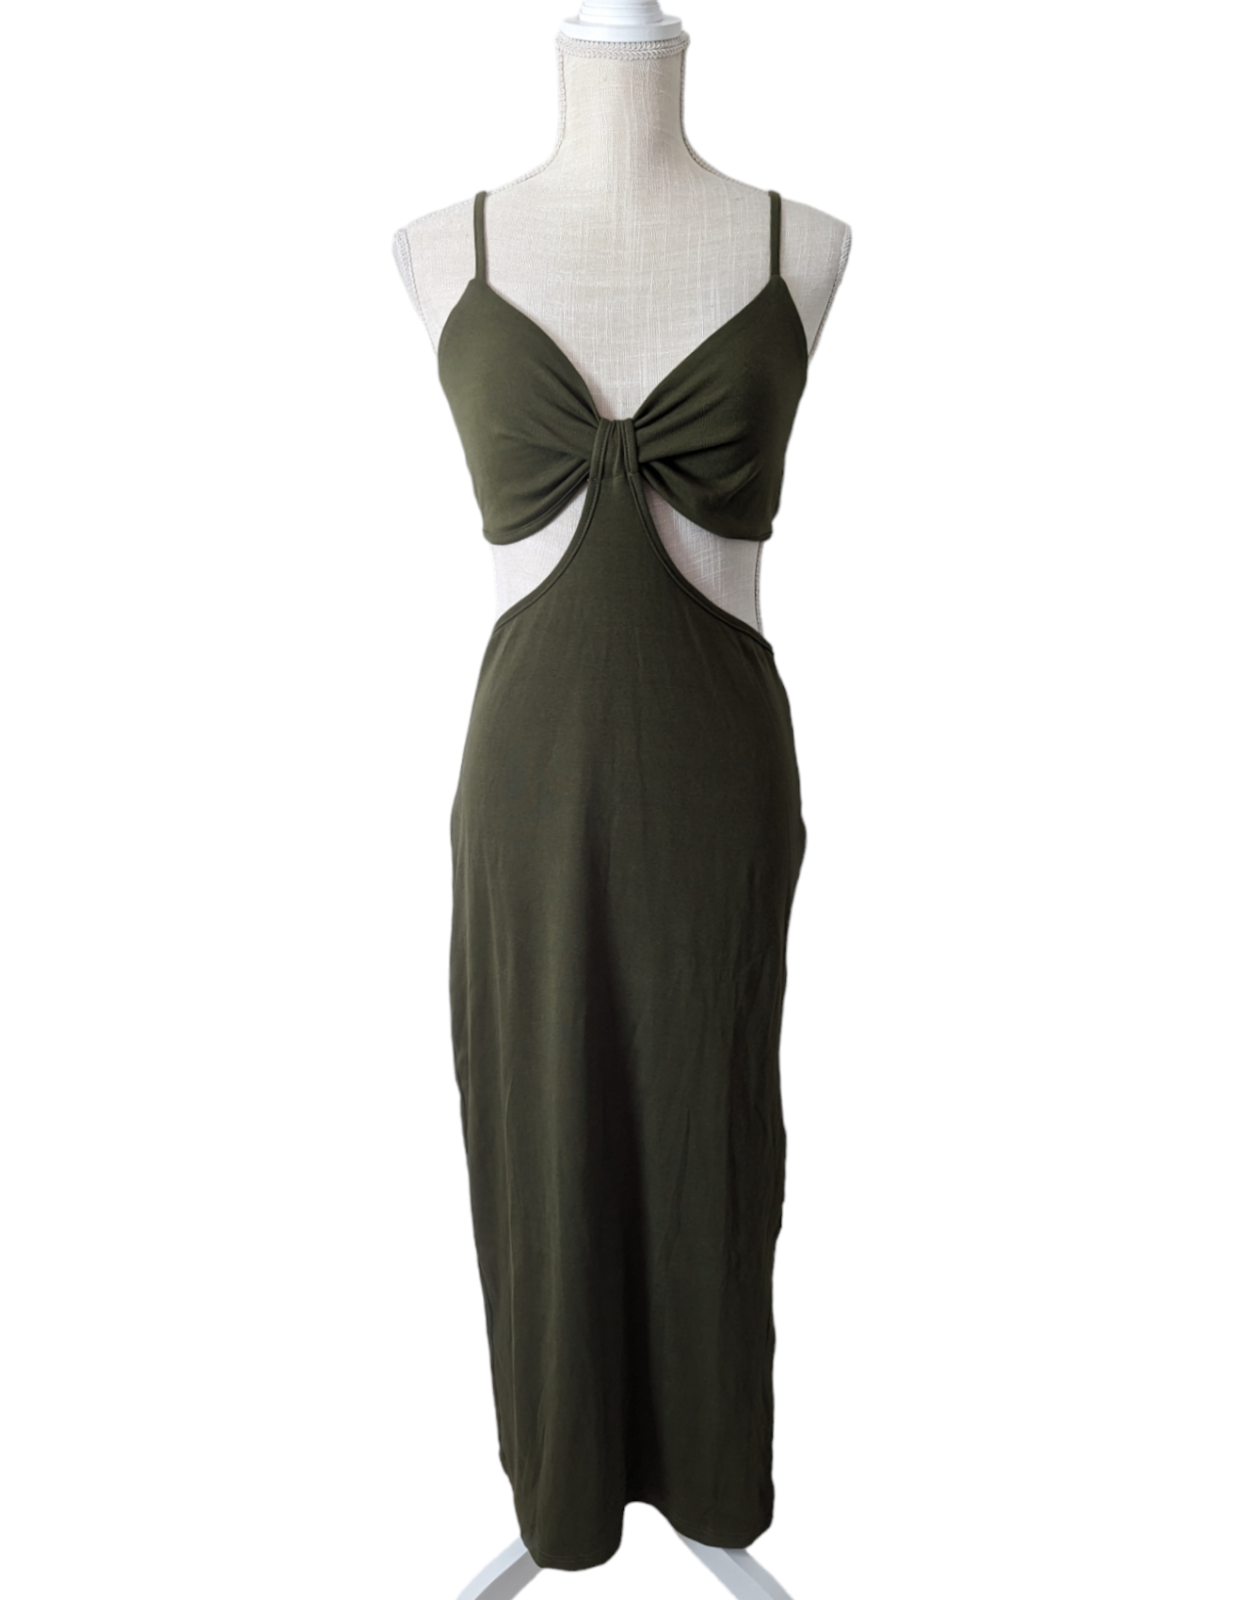 Primary image for Womens Olive Green Bodycon Cut Out Spaghetti Strap Split Hem Dress Sz Large